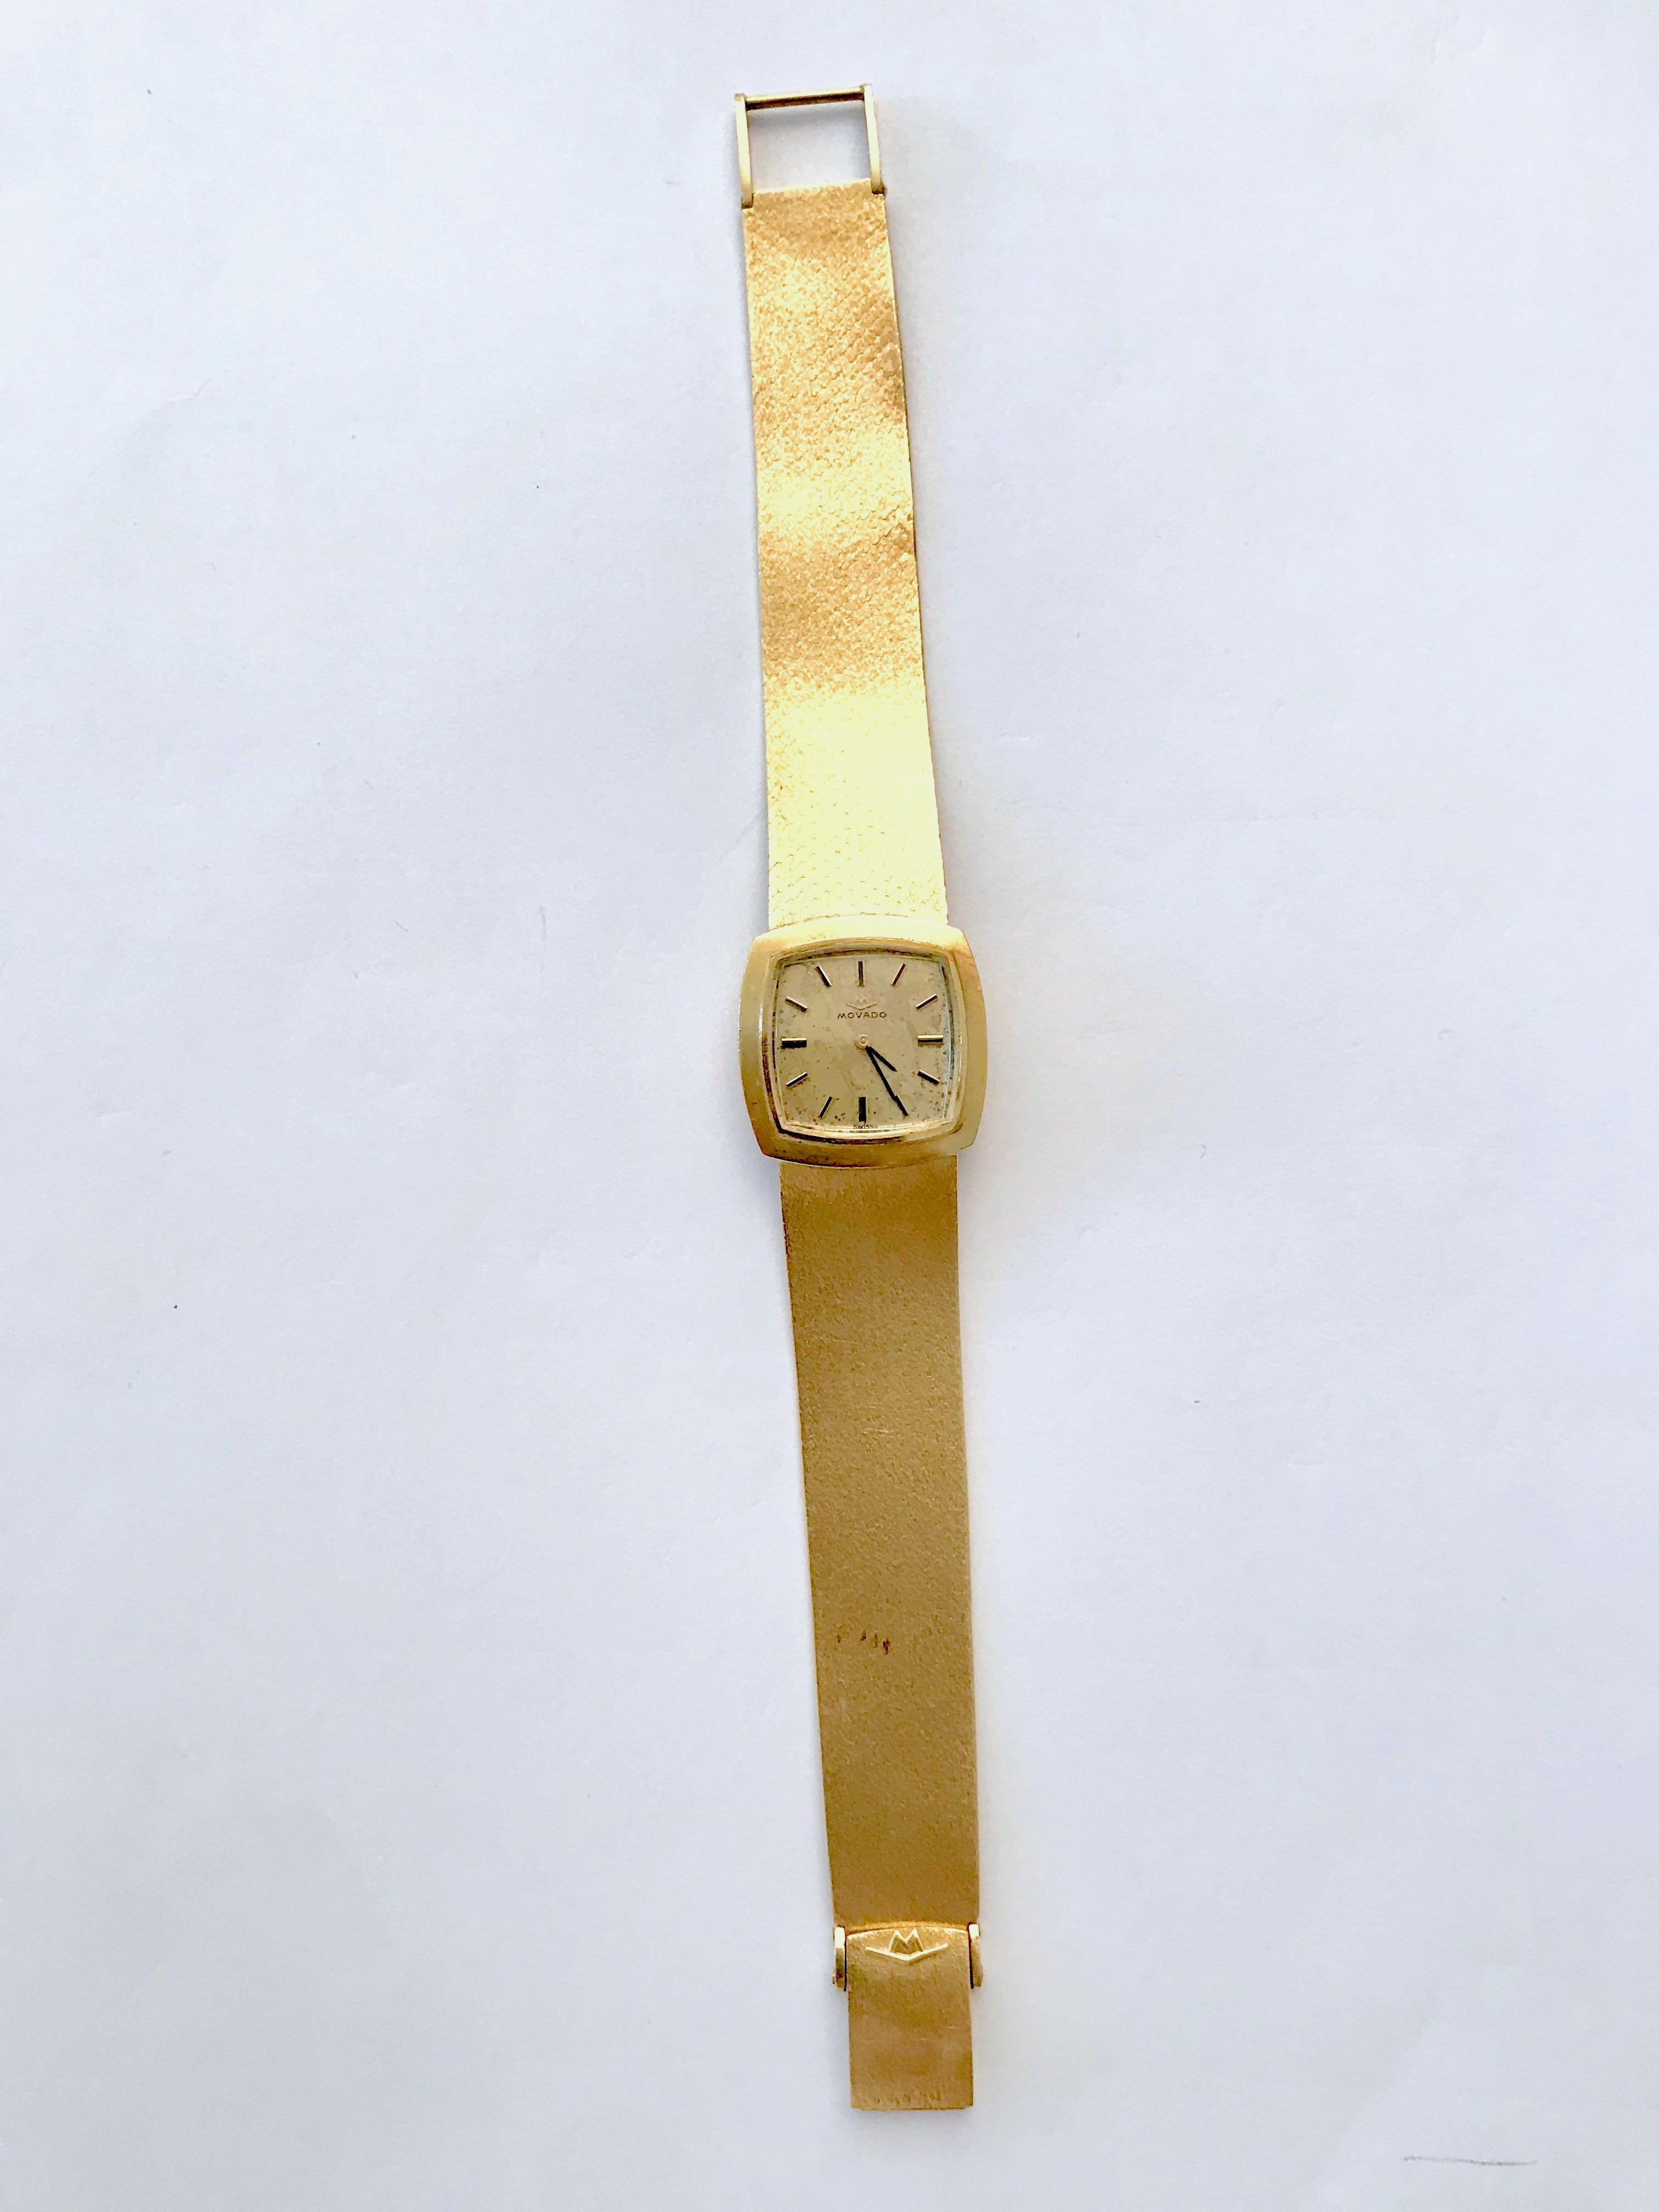 MOVADO Mechanical lady's watch from the Movado brand in 18-carat yellow gold circa 1960
Original ribbon bracelet in 18k satin yellow gold. Original mechanism. The watch is in working condition. 
The bottom of the dial is pitted.
Length: 17.5 to 18